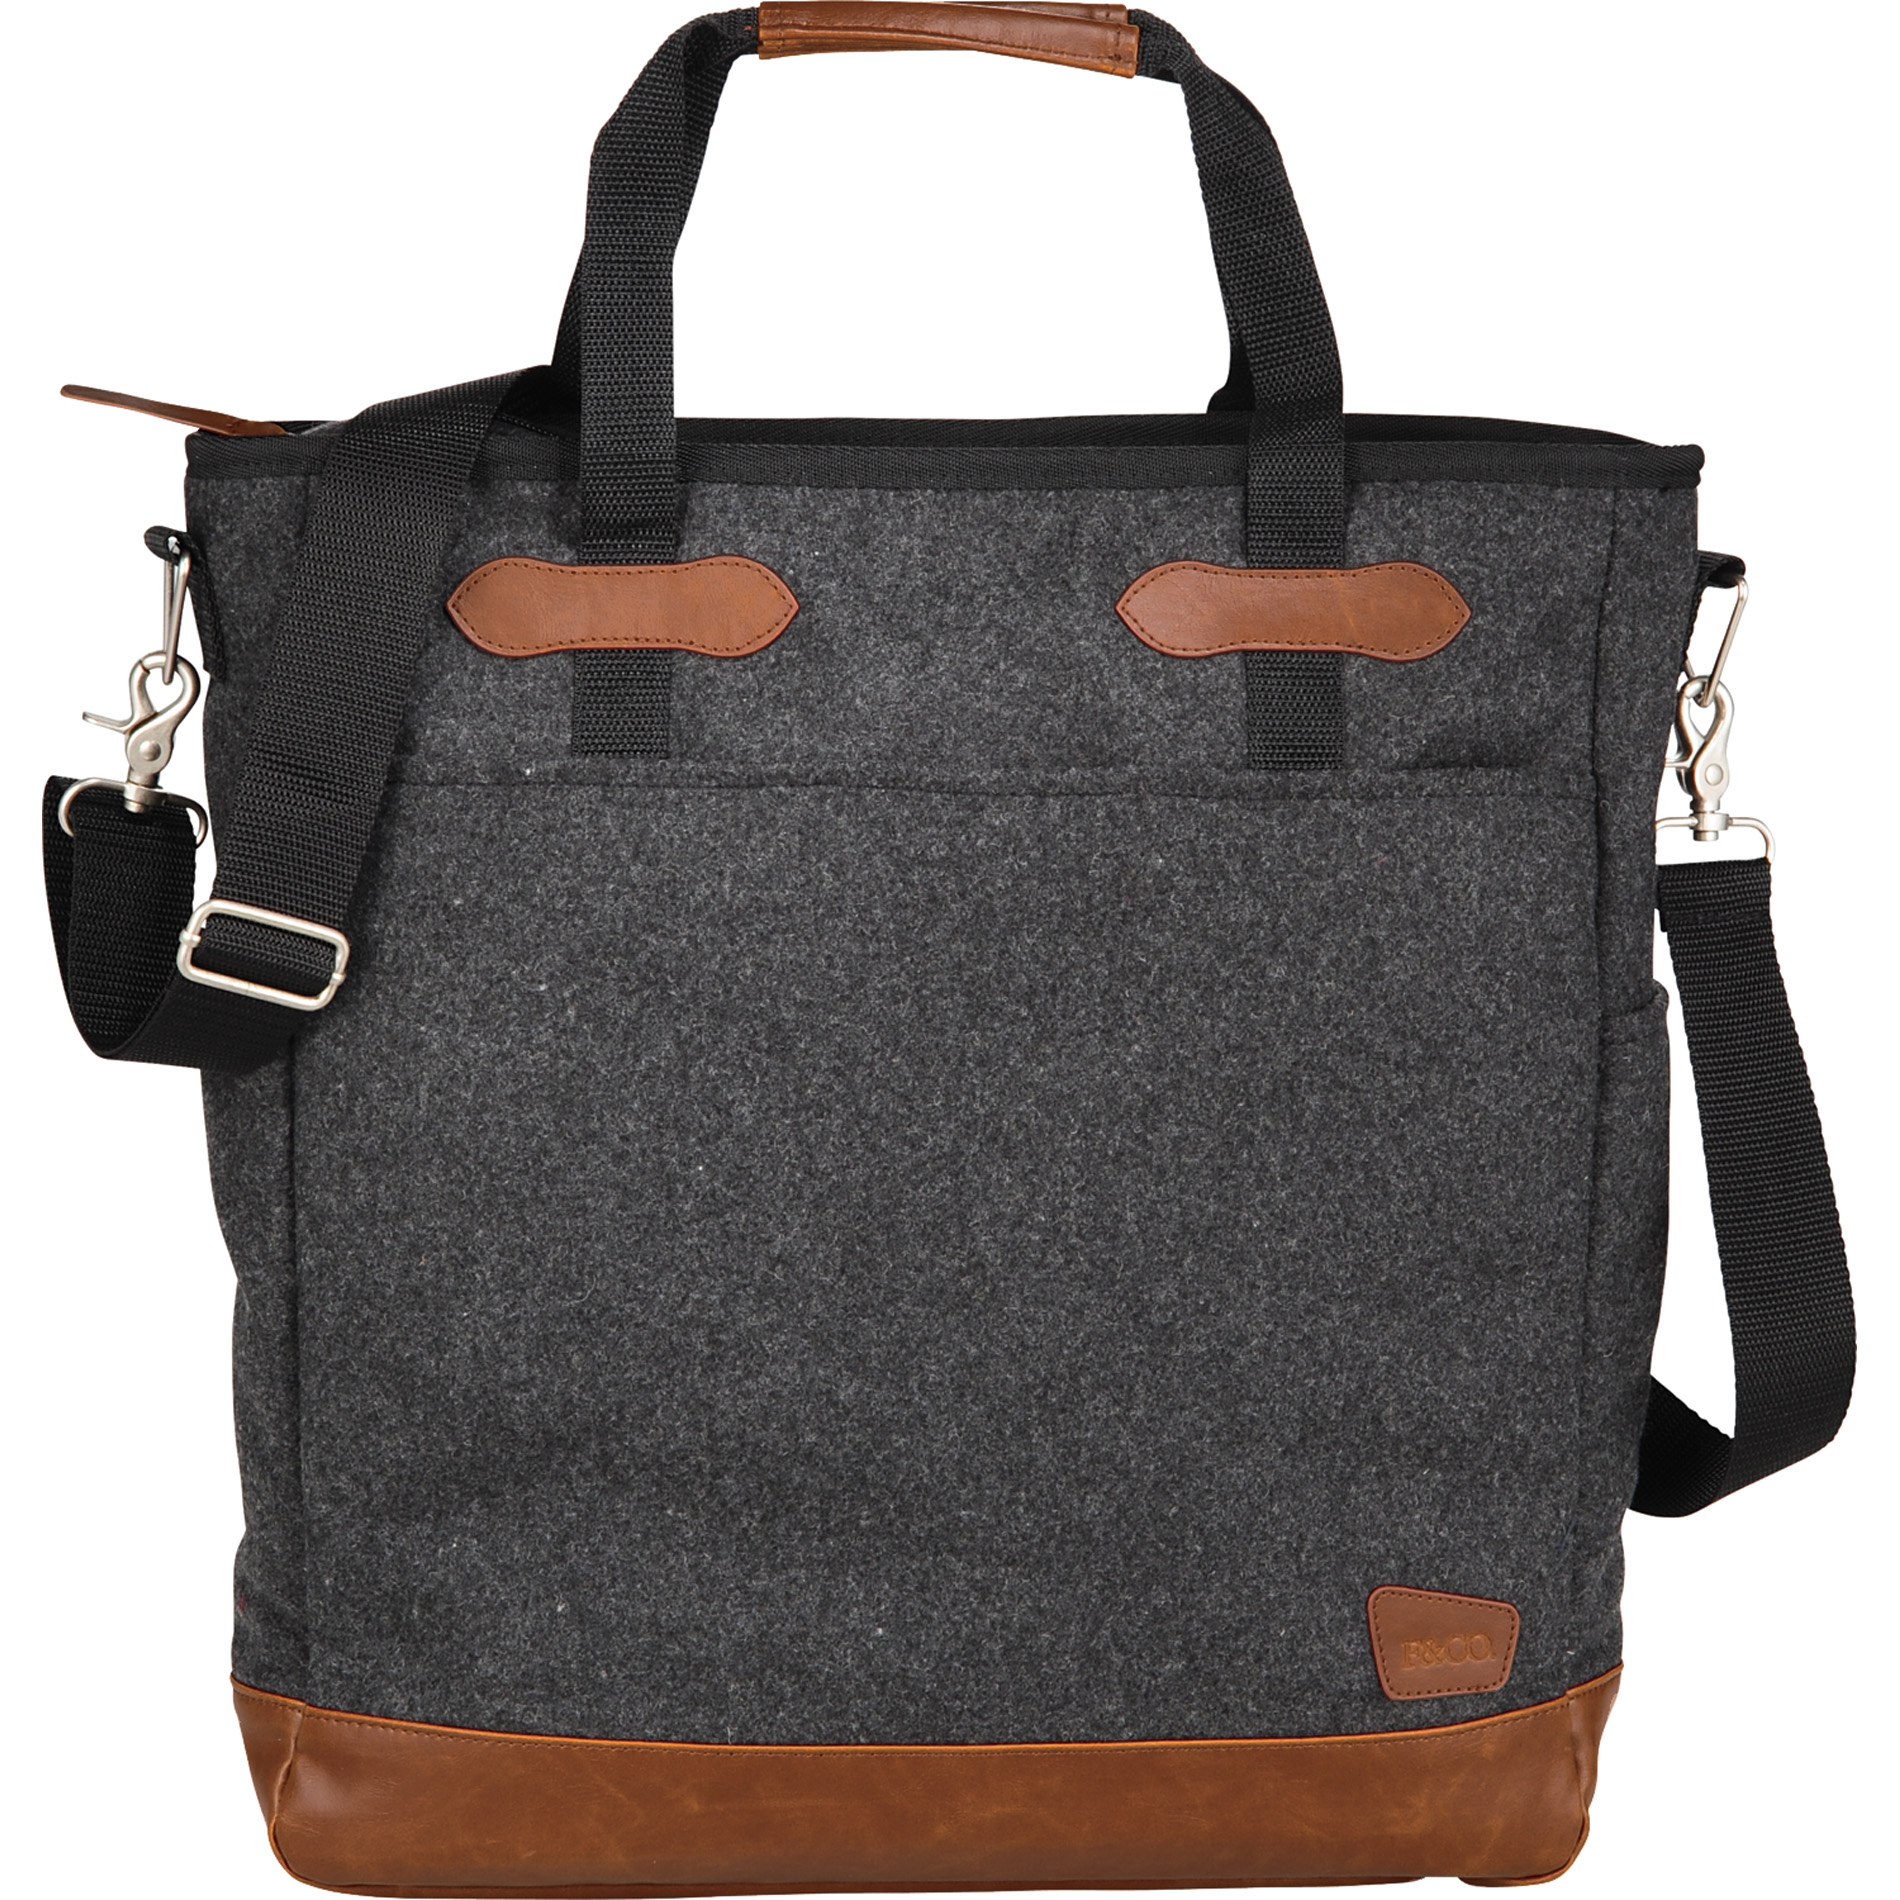 Field & Co.® 7950-86 - Campster Wool 15" Computer Tote